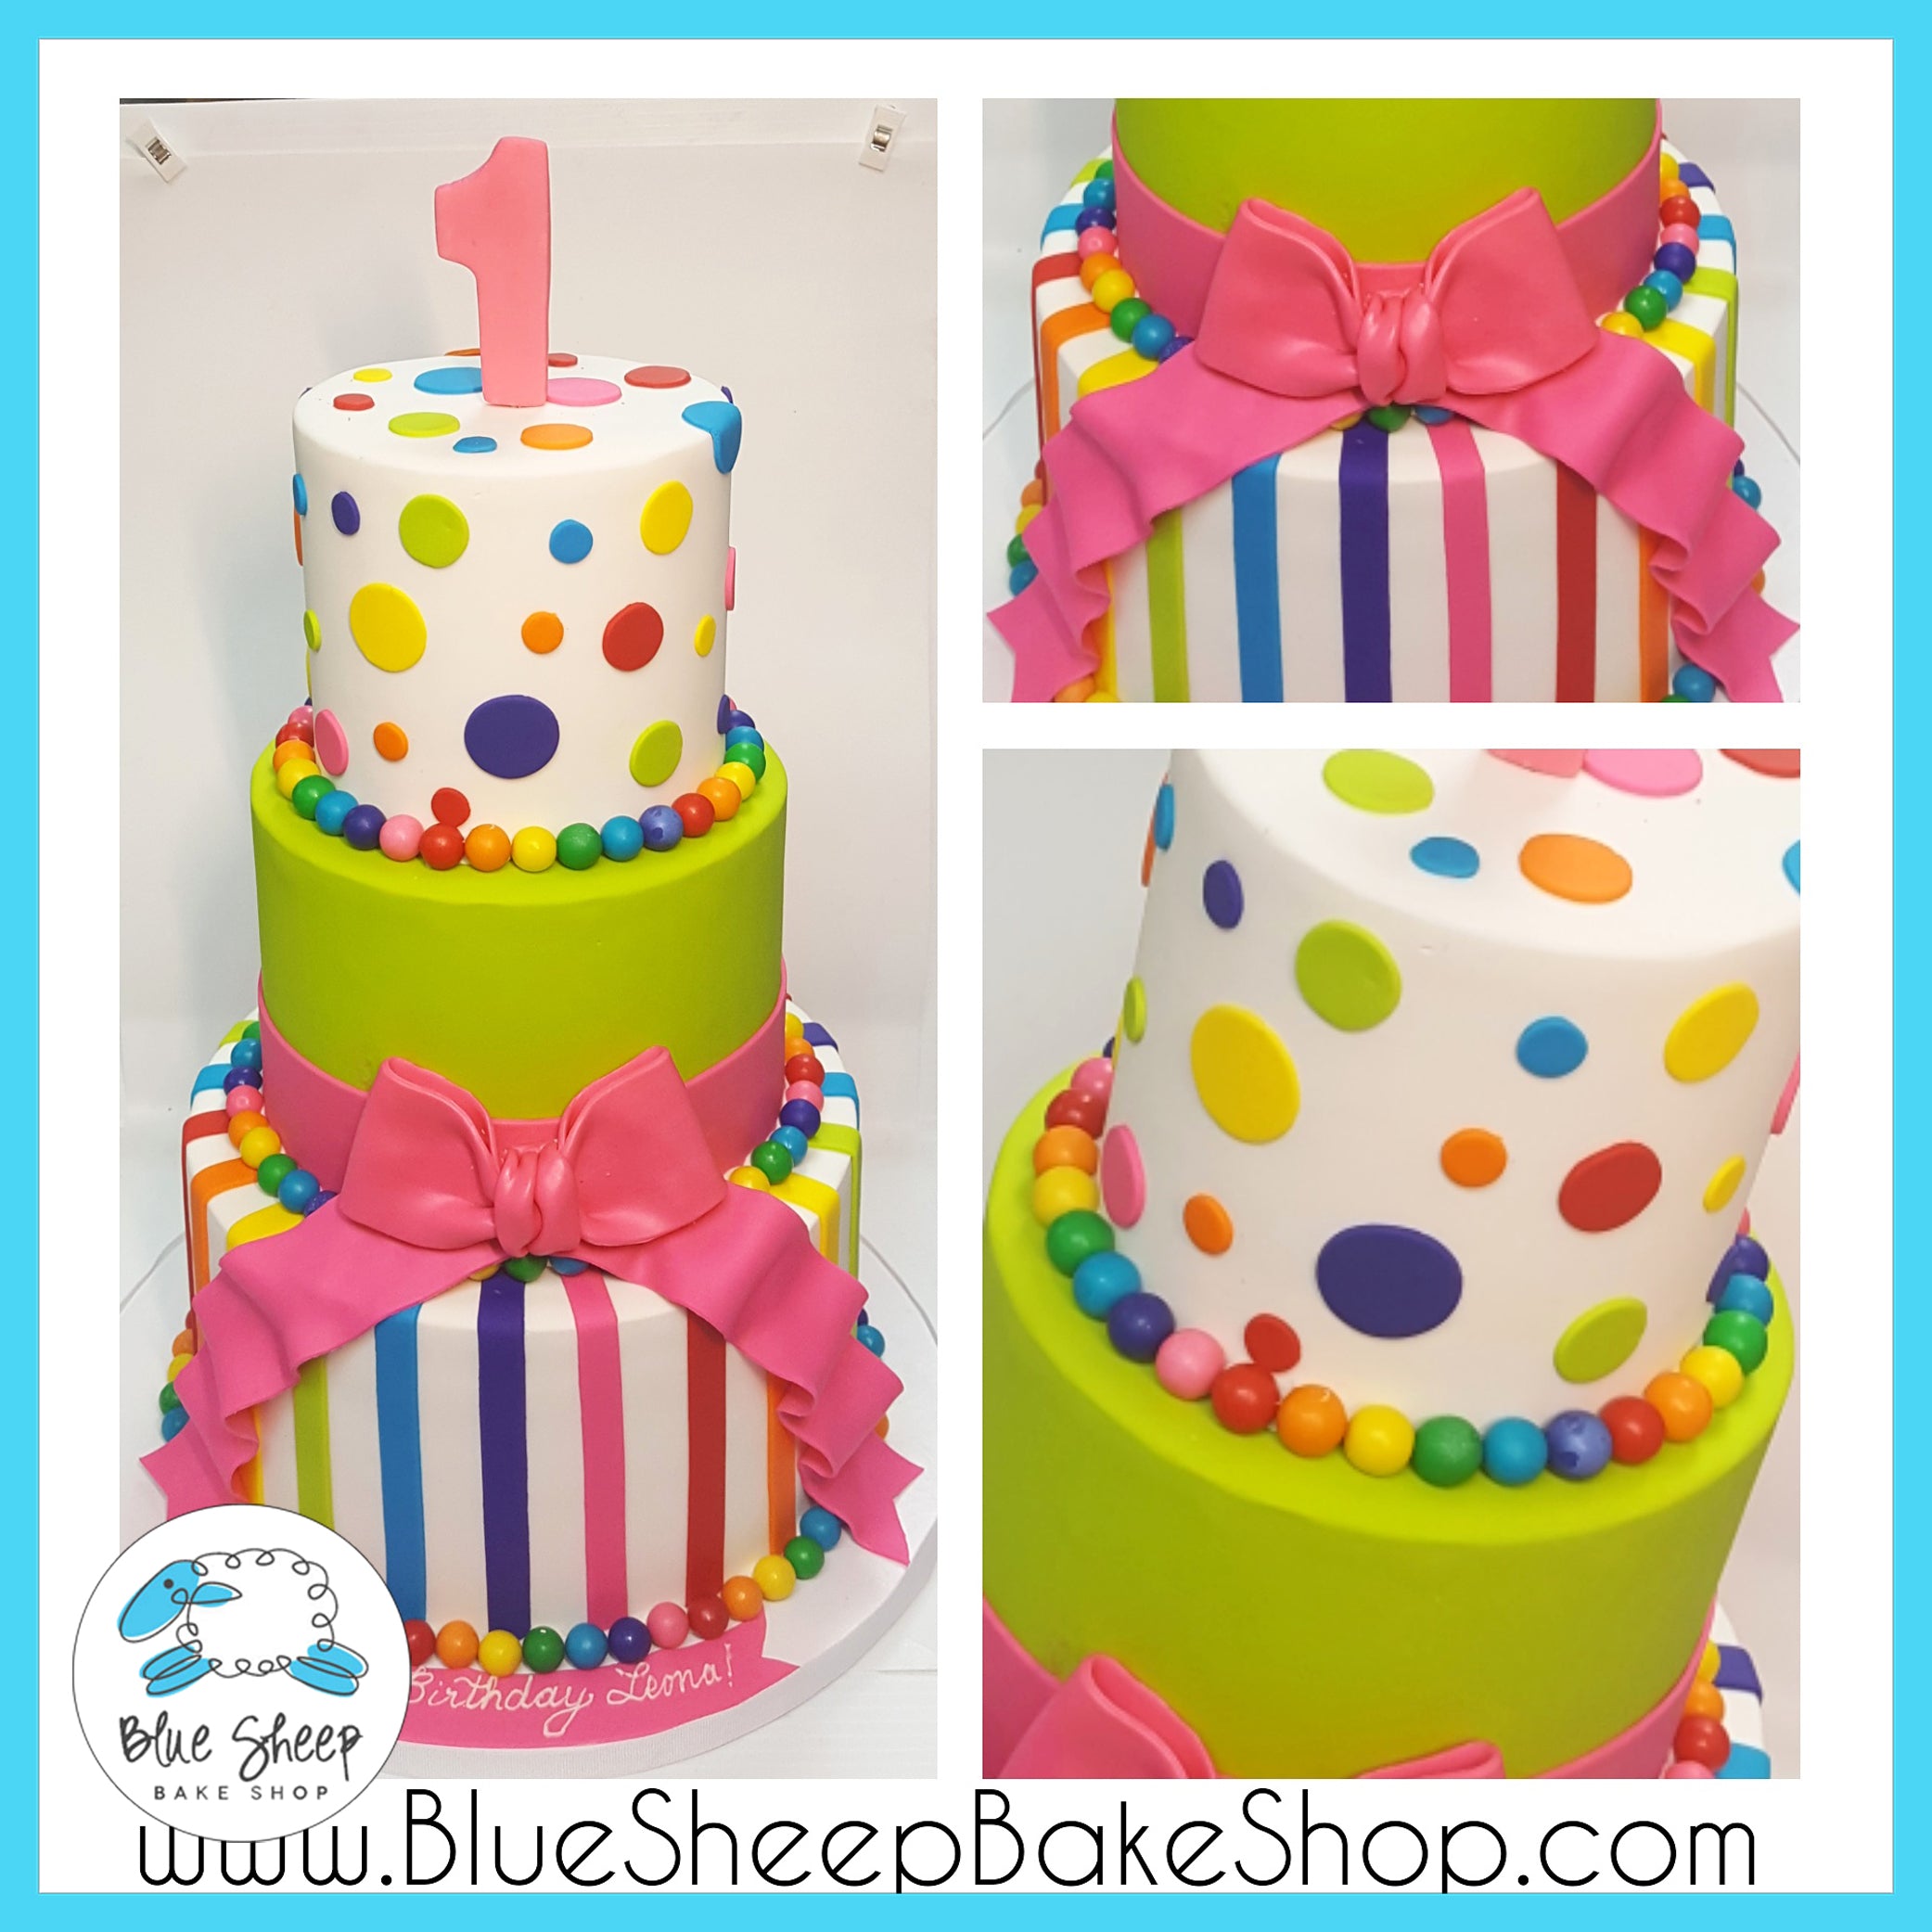 The Bluegrass Baker - Candyland cake! This cake is for every candy lover!  Cotton candy theme buttercream topped with suckers, sprinkles and taffy. So  fun! 🍭🍬 | Facebook